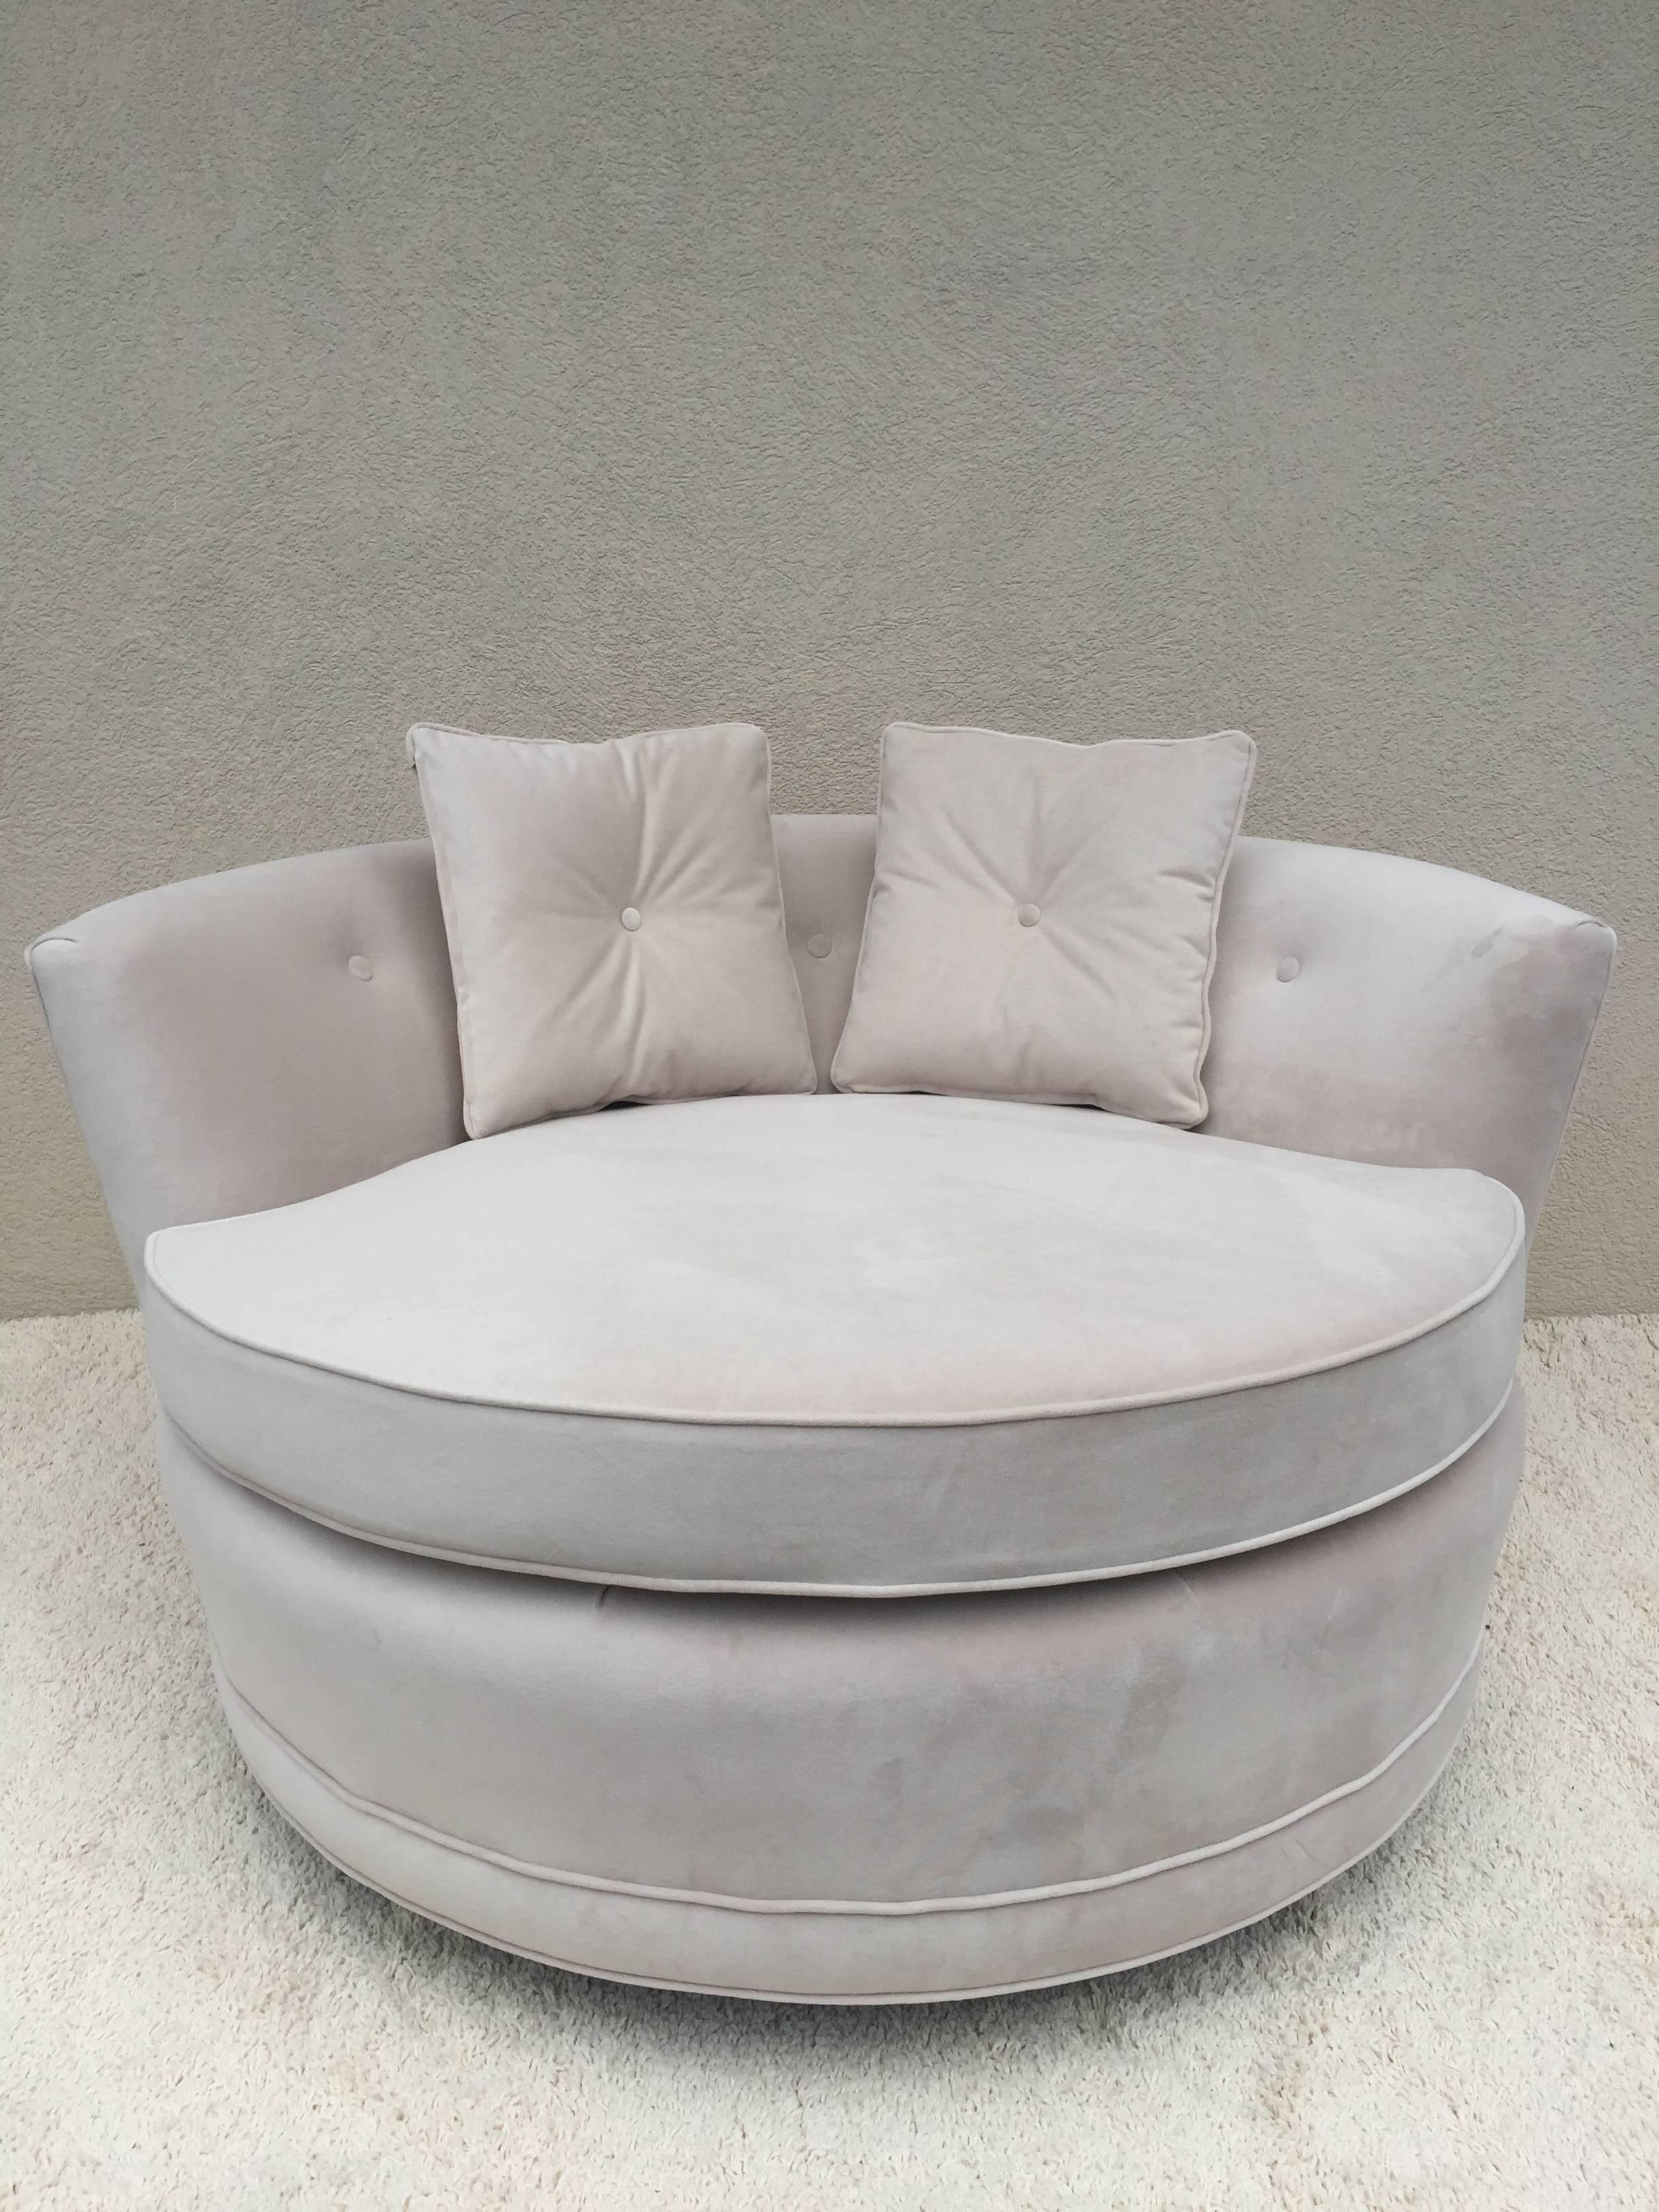 Milo Baughman Style extra large circular two-seat club cair. Covered in off-white short pile velvet/ultra suede fabric. Petite black feet with brass cap tip, with tufted button back, elegant design.

The depth of the chair is slightly less than the